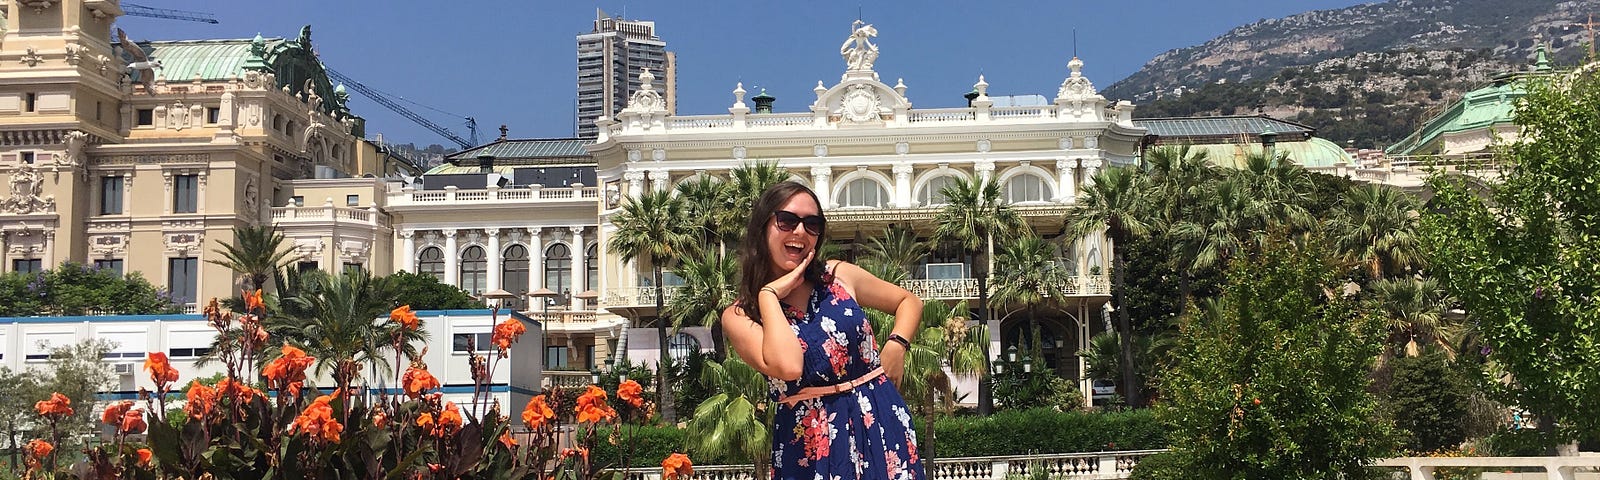 Woman in dress posing in front of flowers and a palace in Monaco.